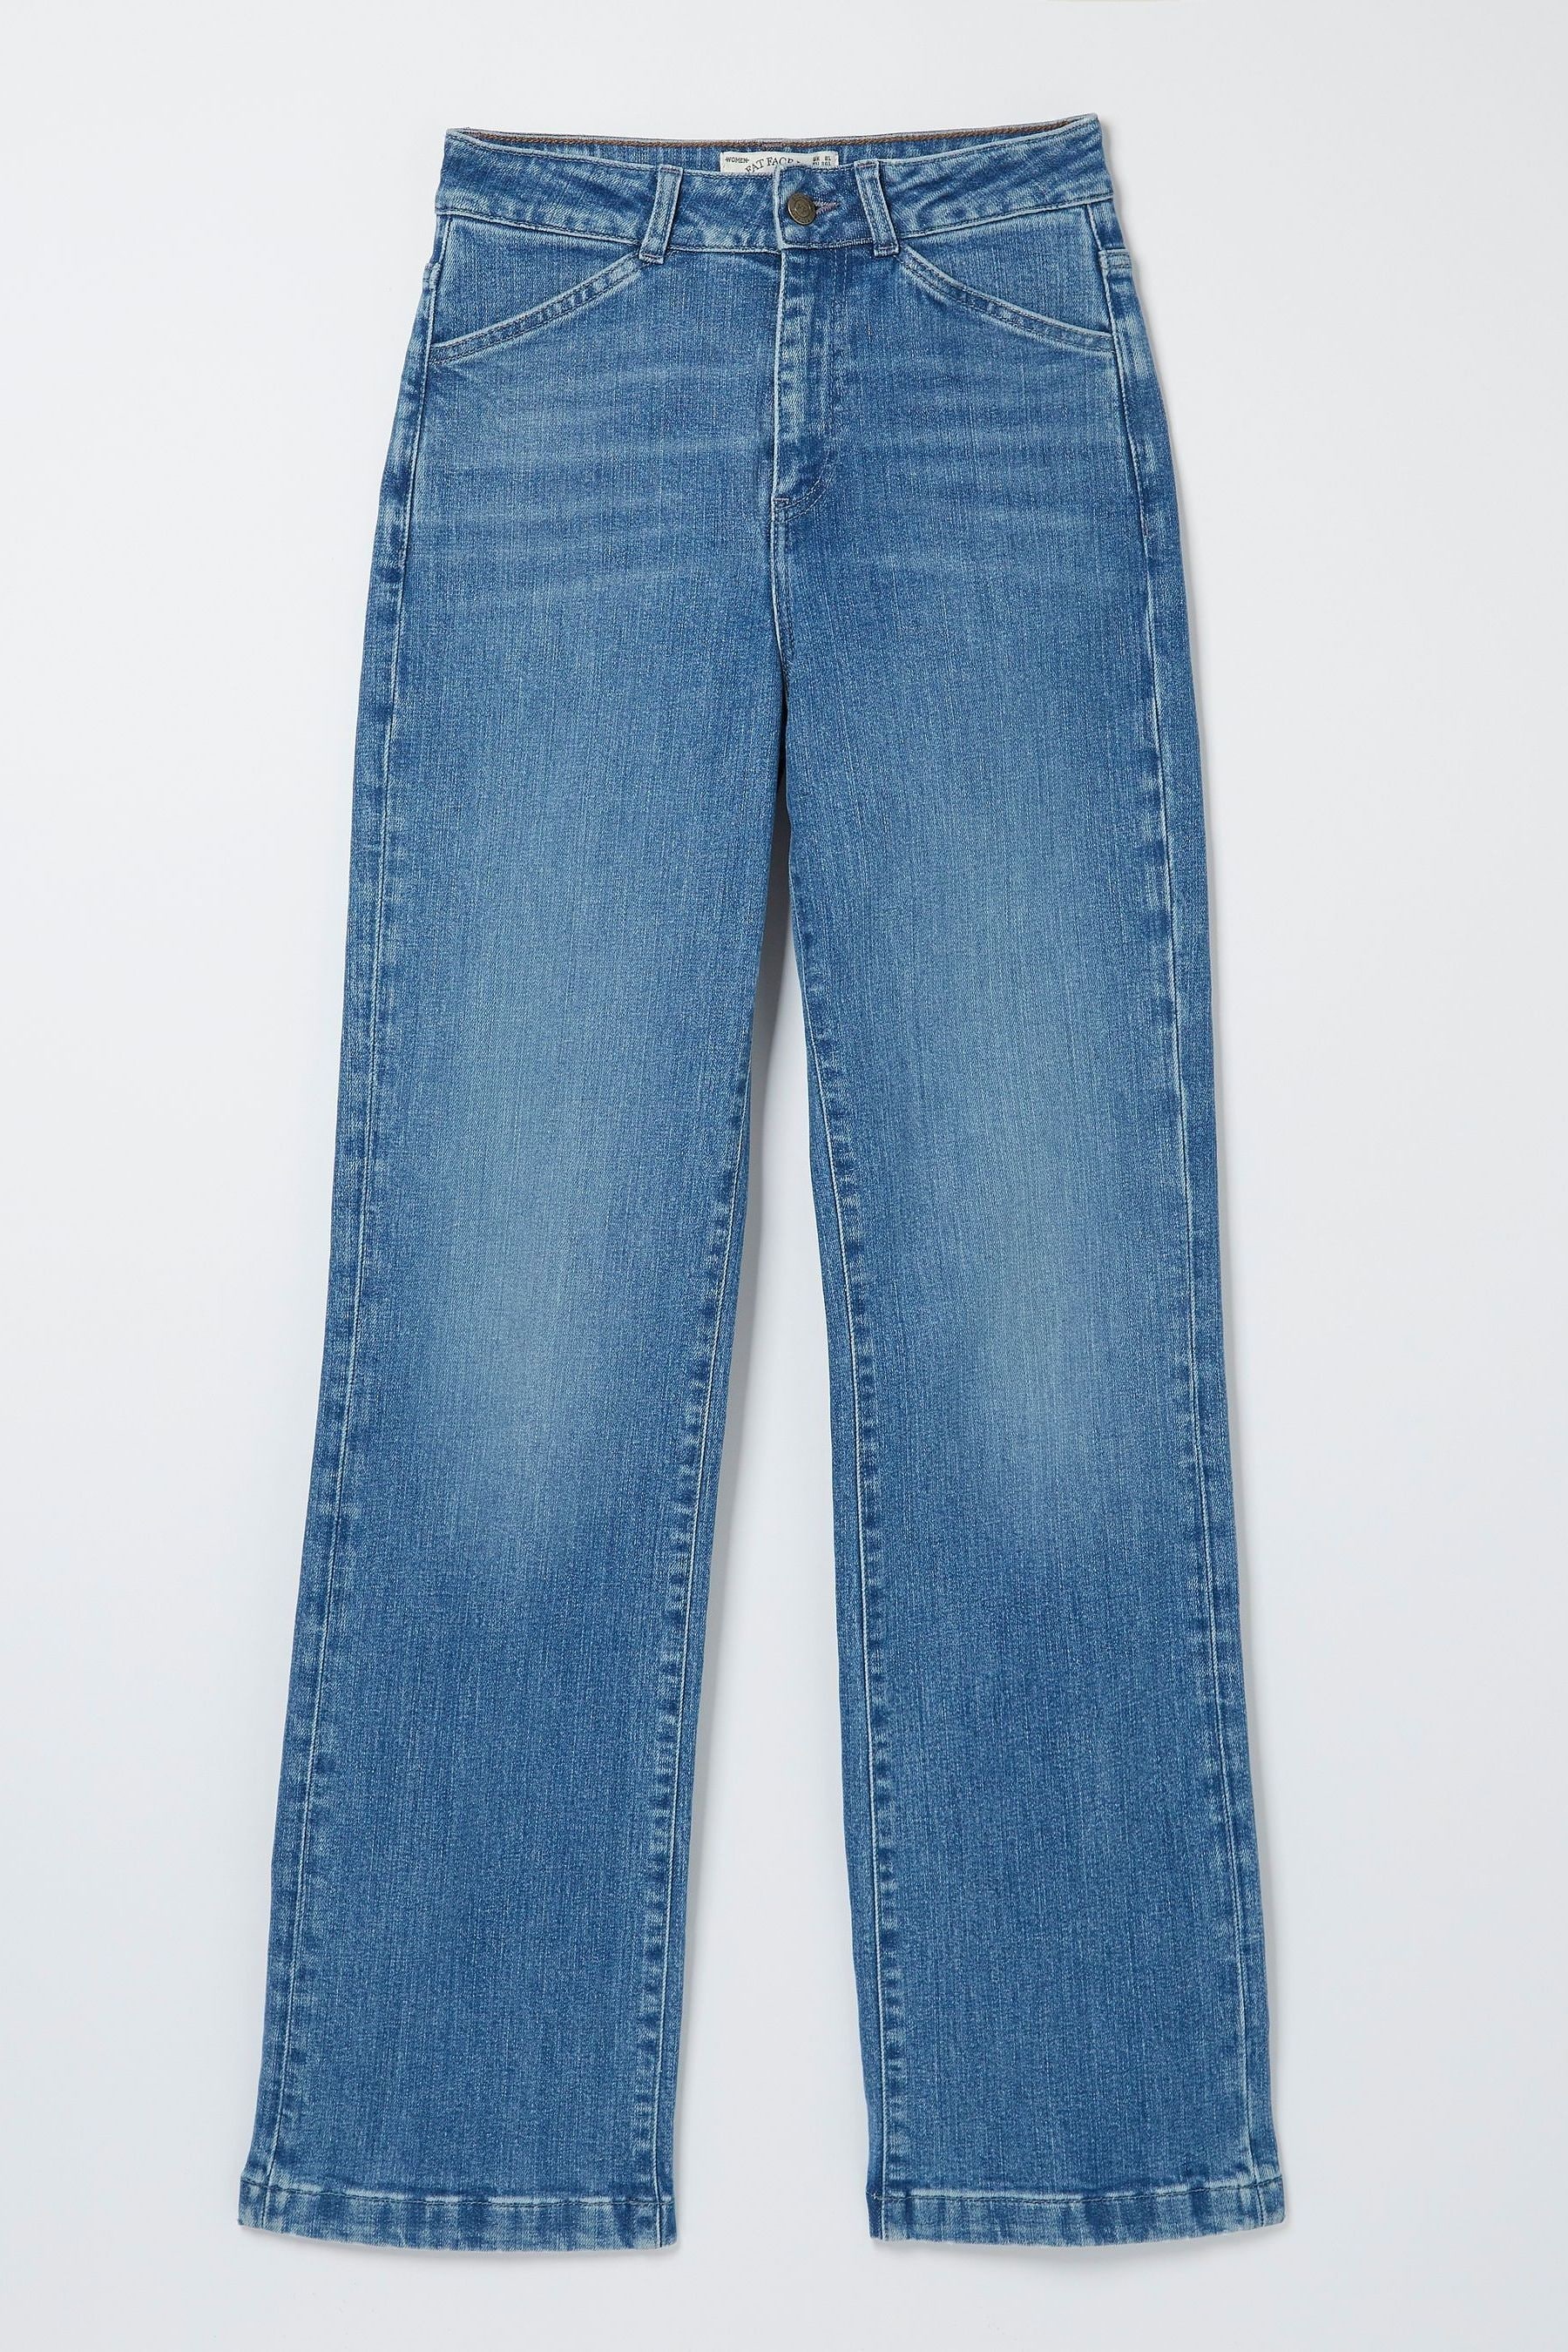 Buy FatFace Elise Wide Leg Jeans from Next Ireland